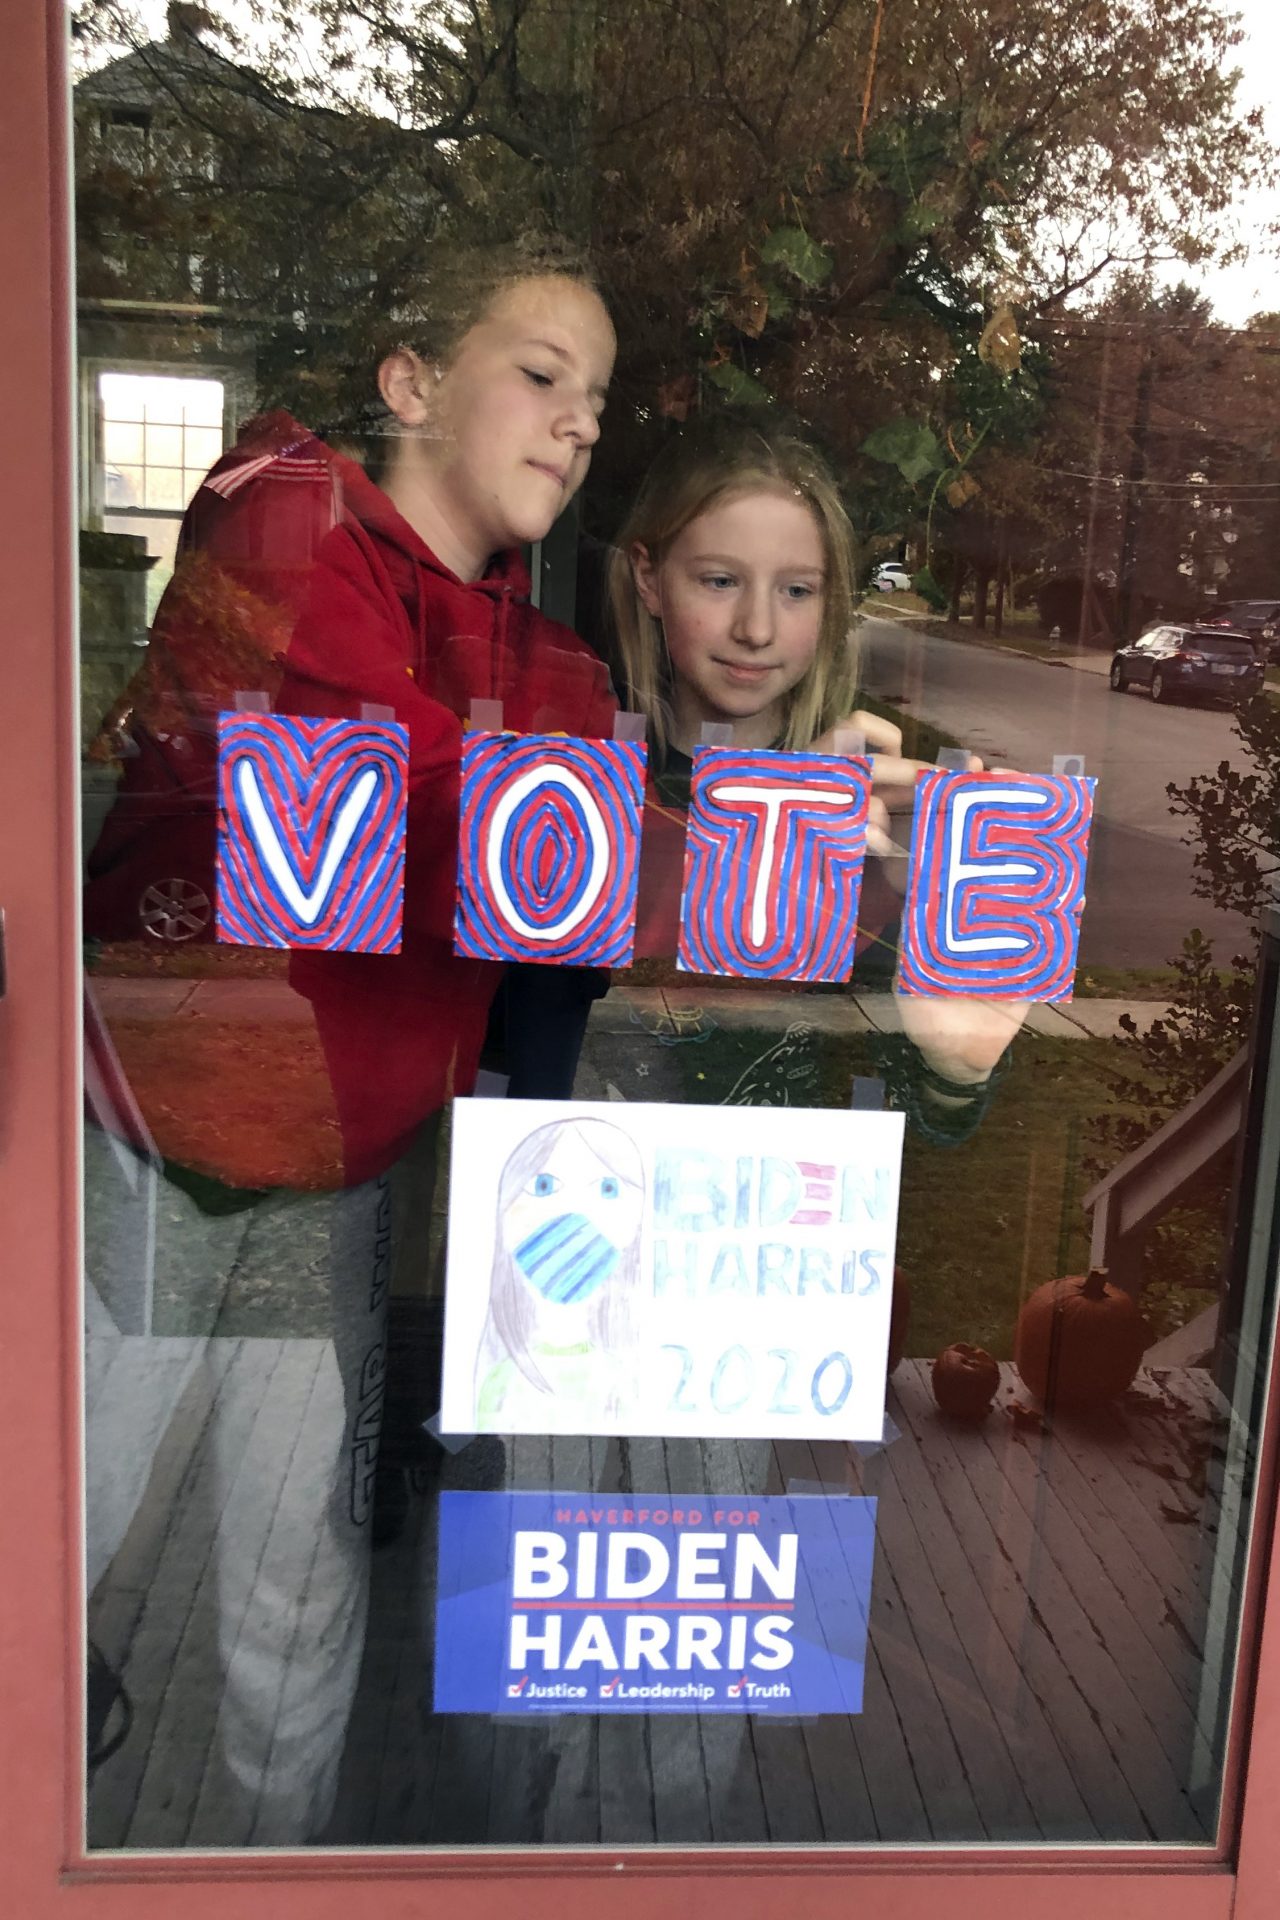 Sisters Maya and Julia Schmitt tape homemade signs on their home's front storm door on Election Day Tuesday Nov. 3, 2020, in the Philadelphia suburb of Havertown, Pa.